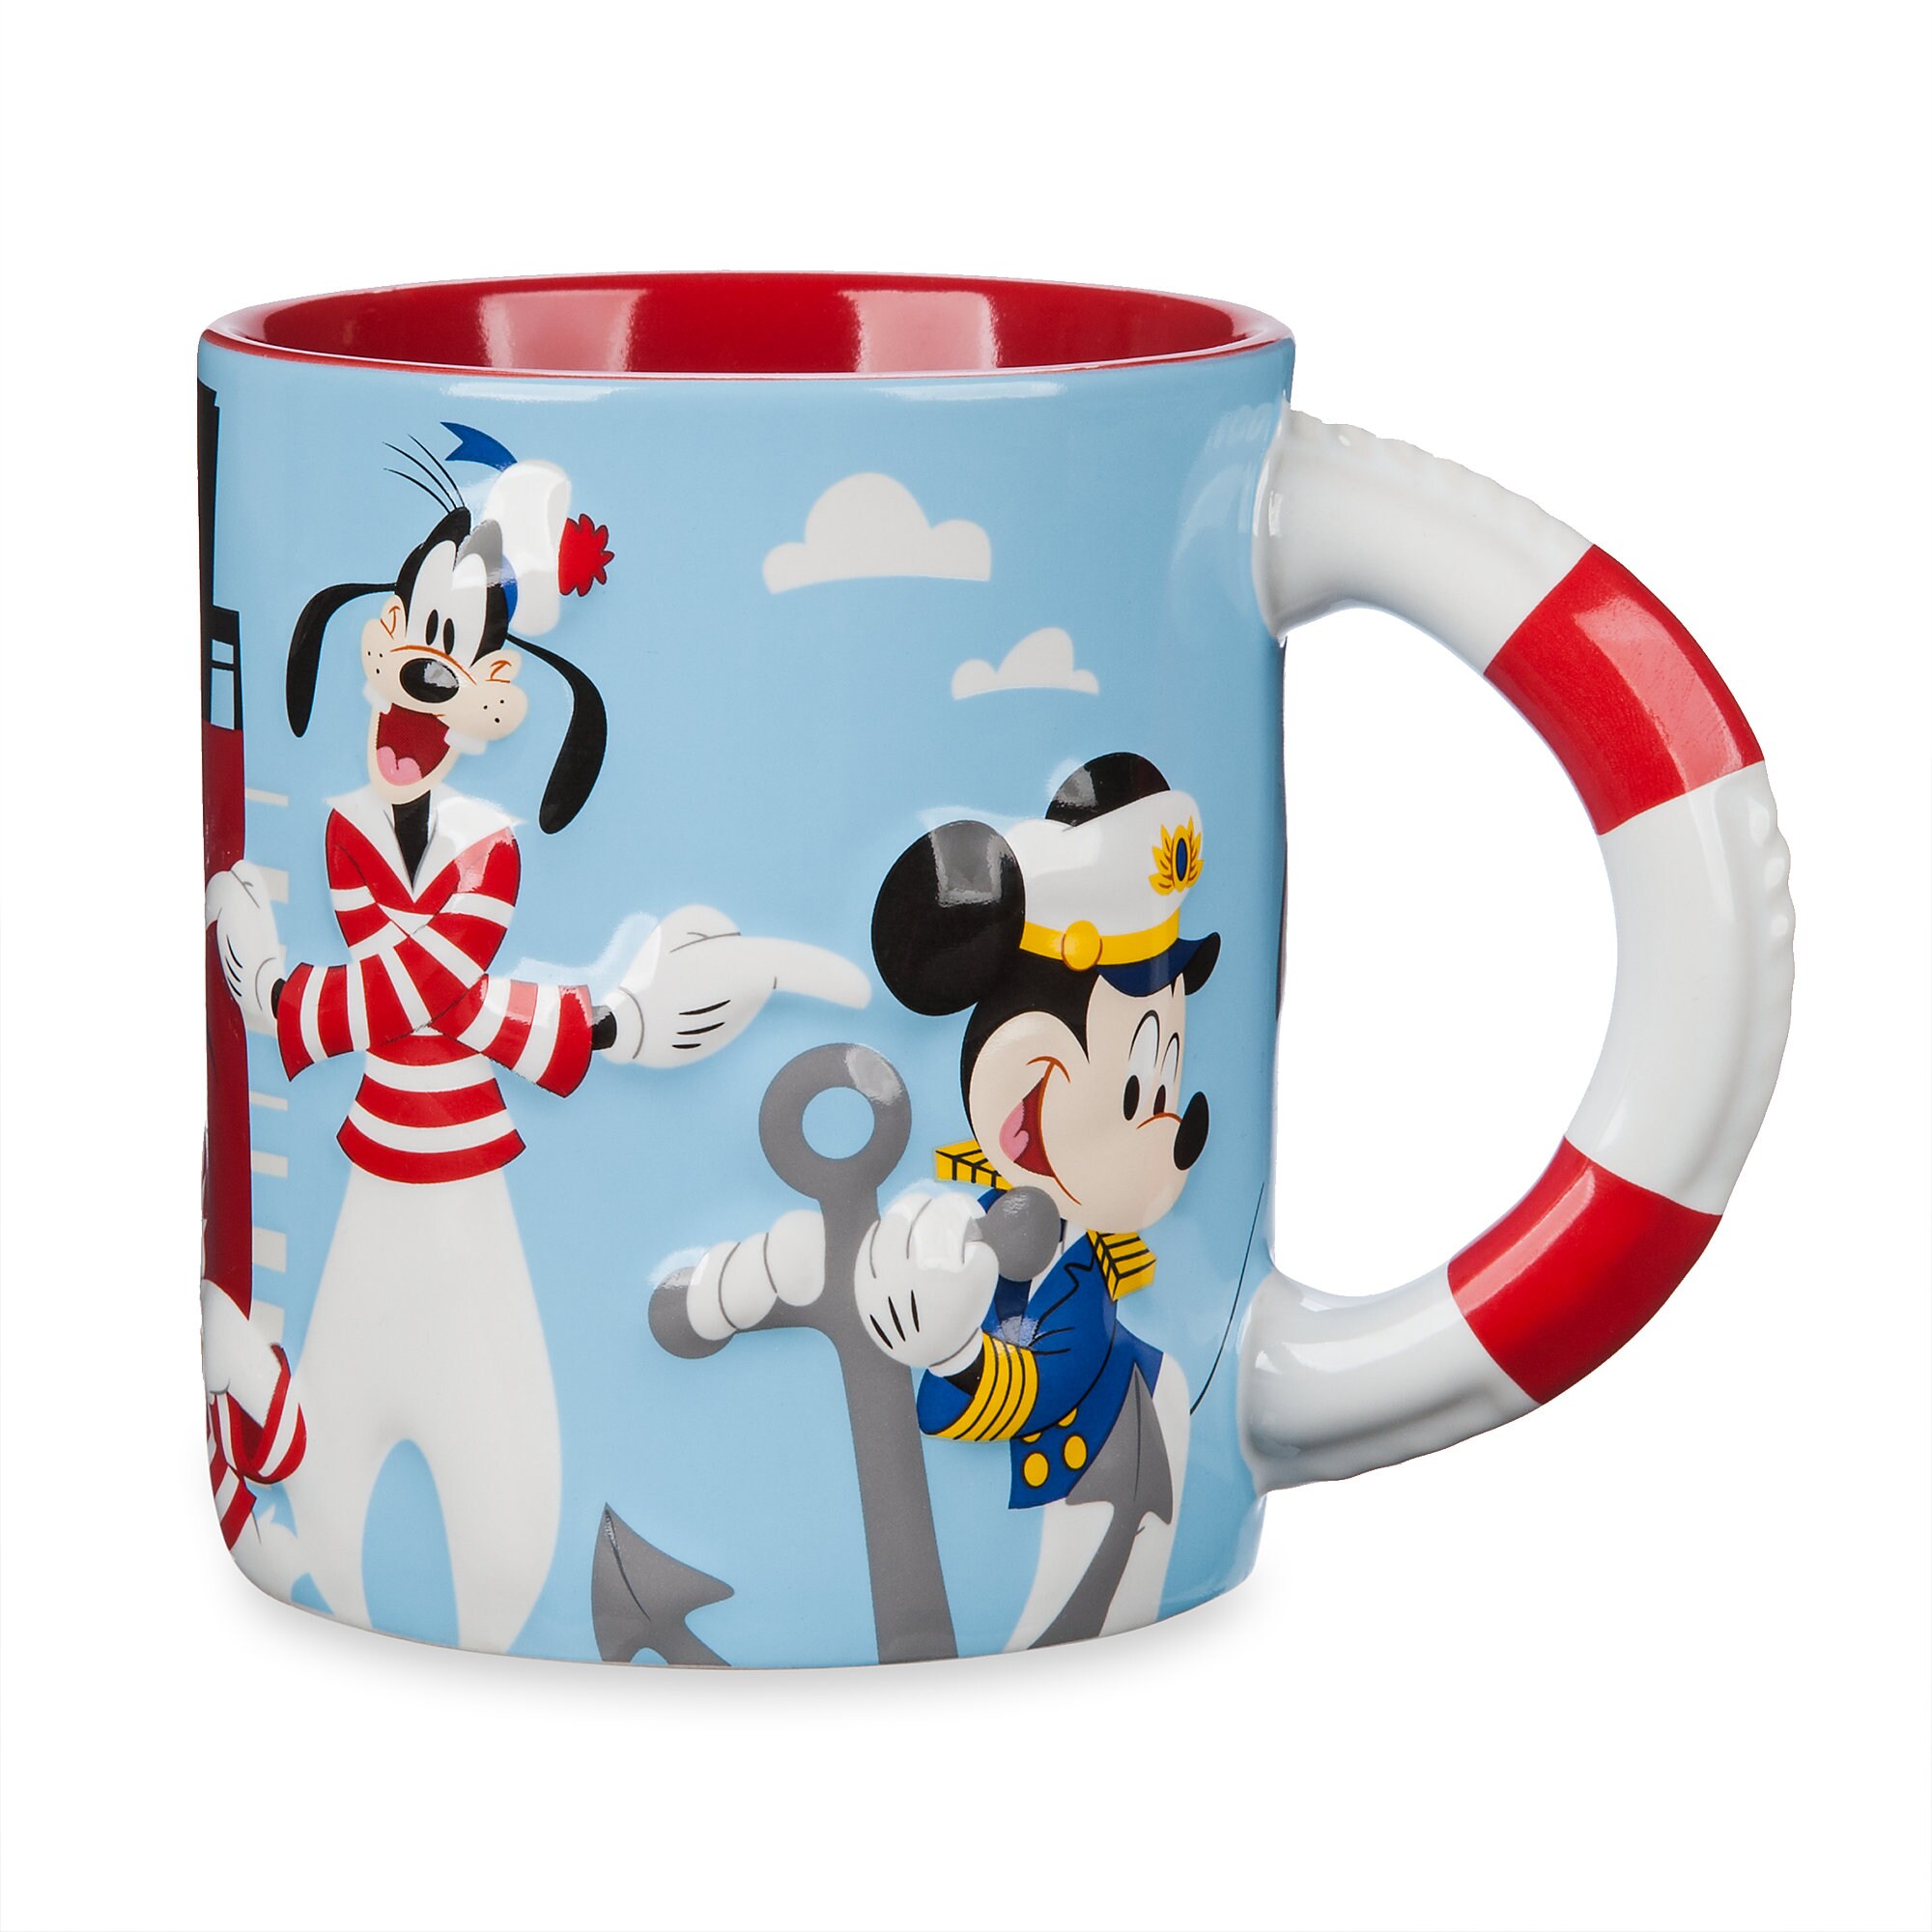 Mickey Mouse and Friends Mug - Disney Cruise Line